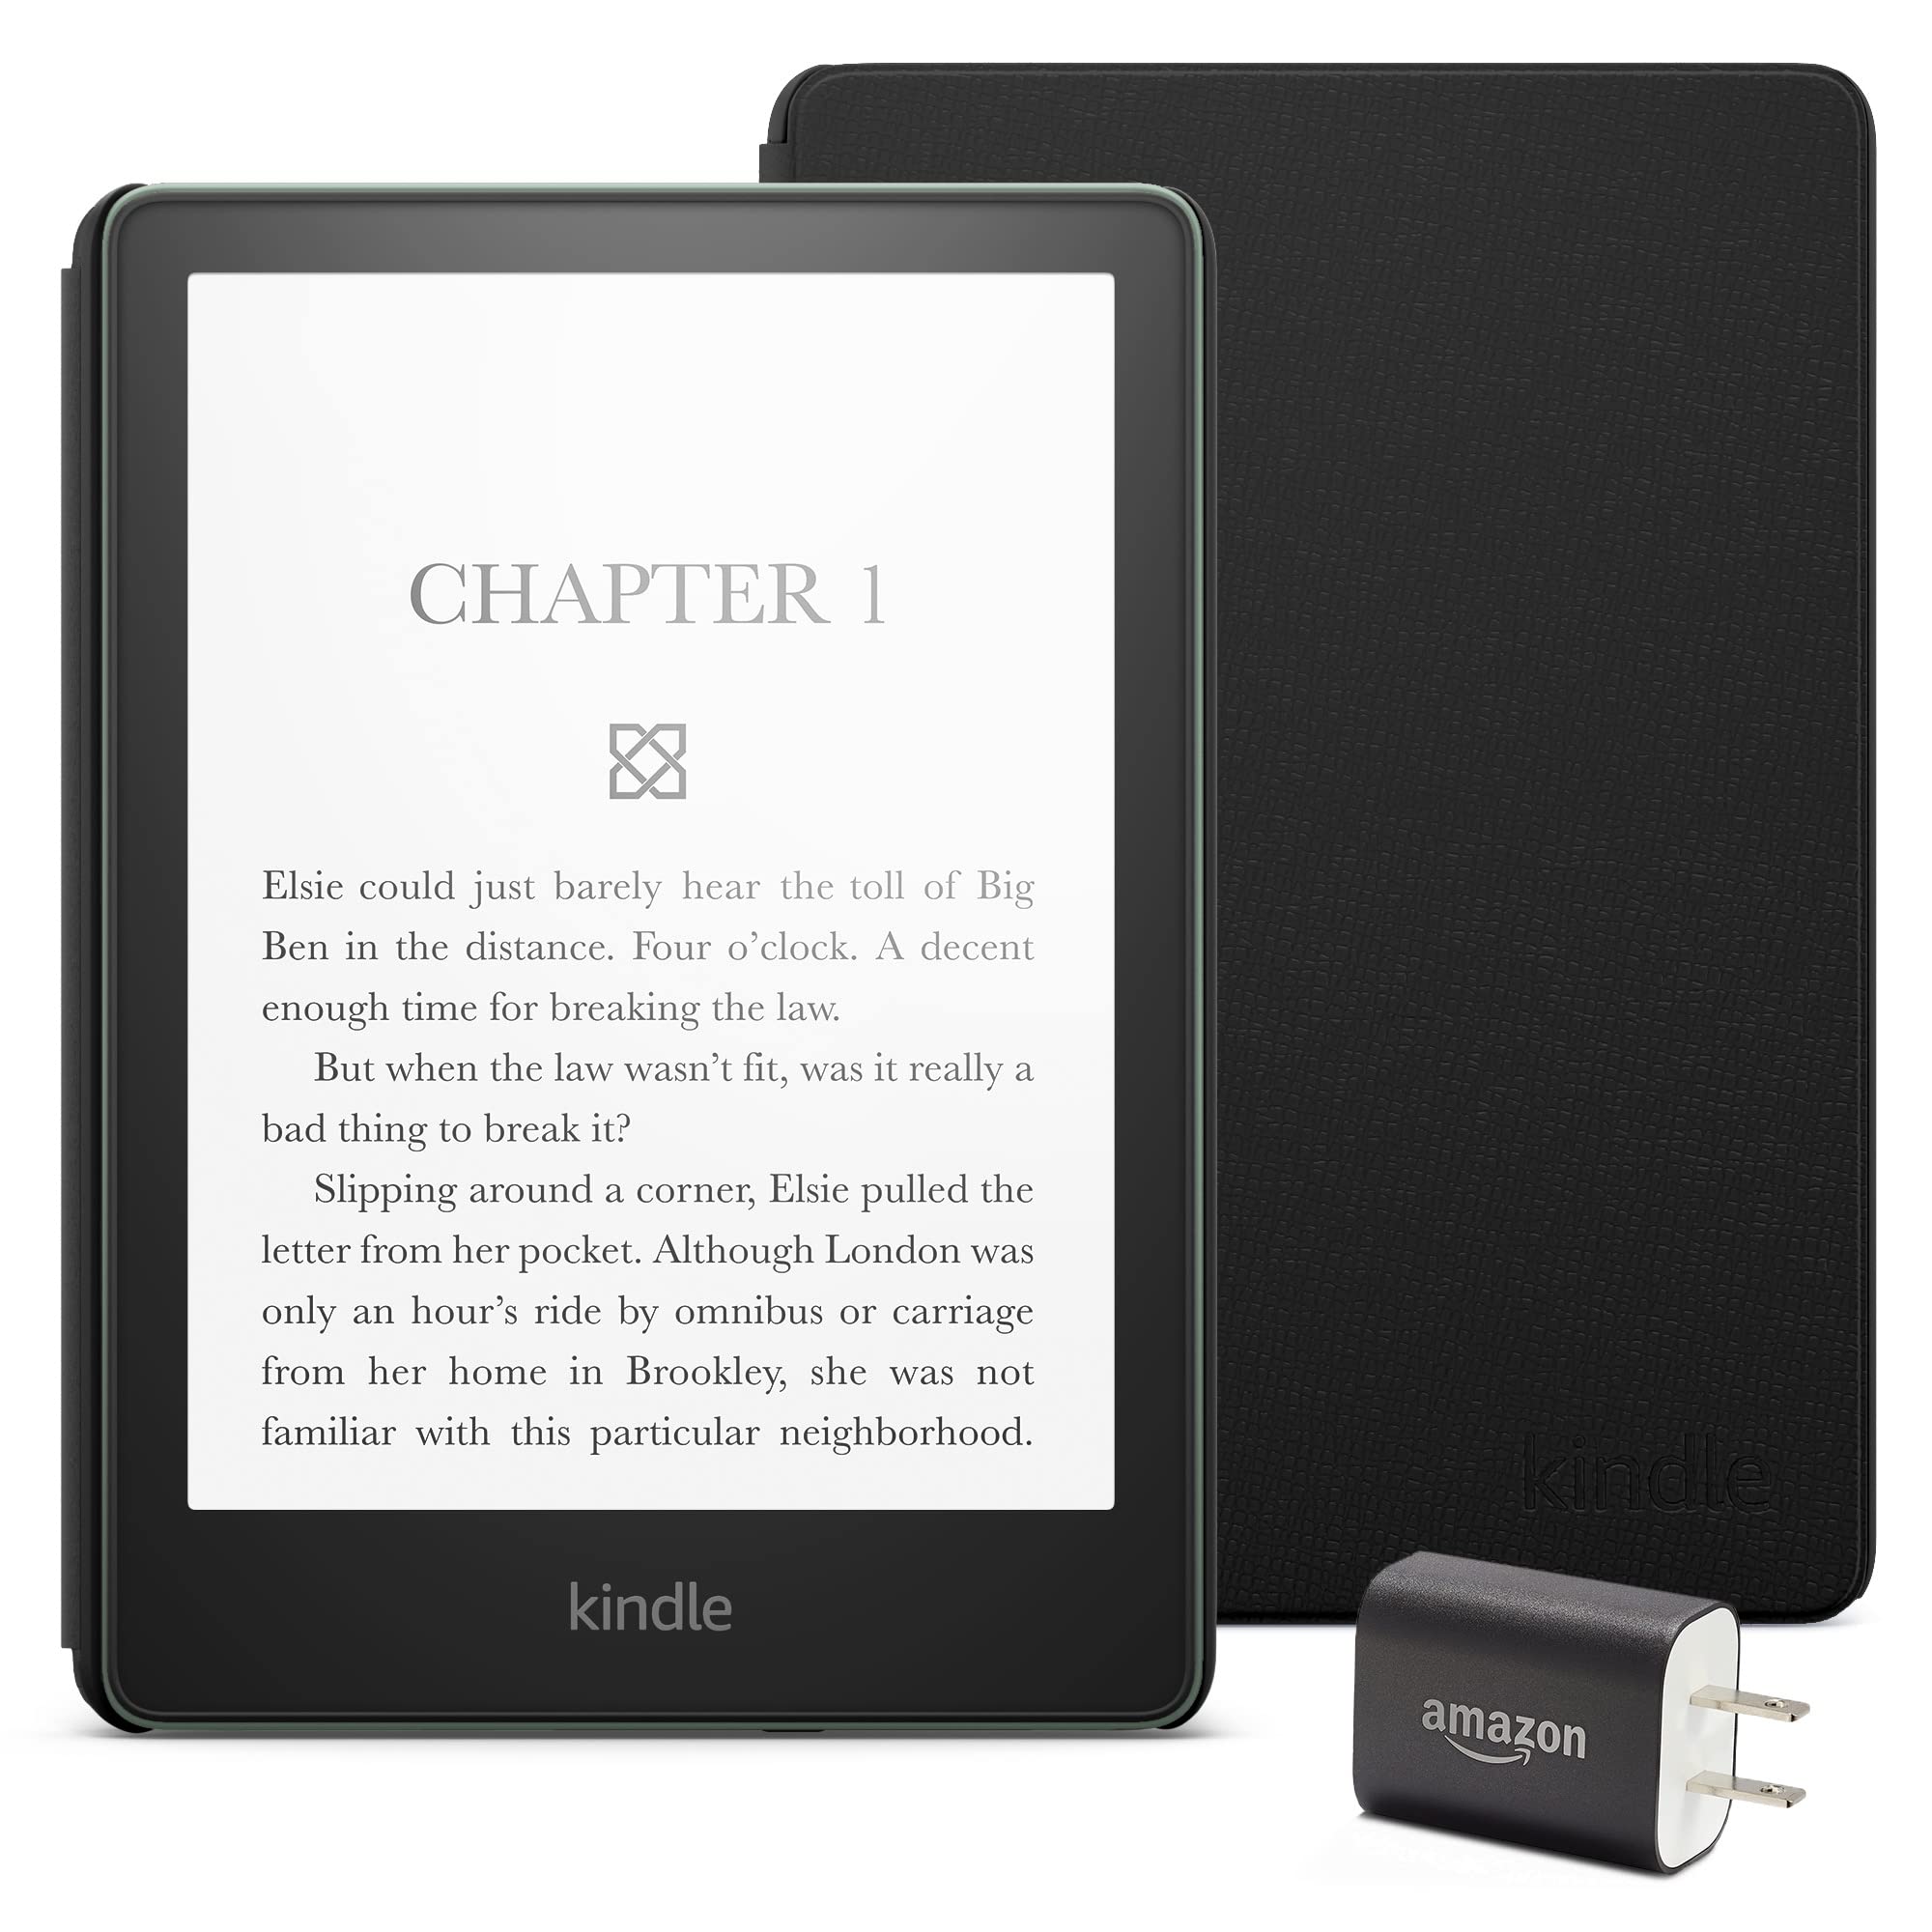 Kindle Paperwhite Essentials Bundle including Kindle Paperwhite (16 GB) - Agave Green, Leather Cover - Black, and Power Adapter